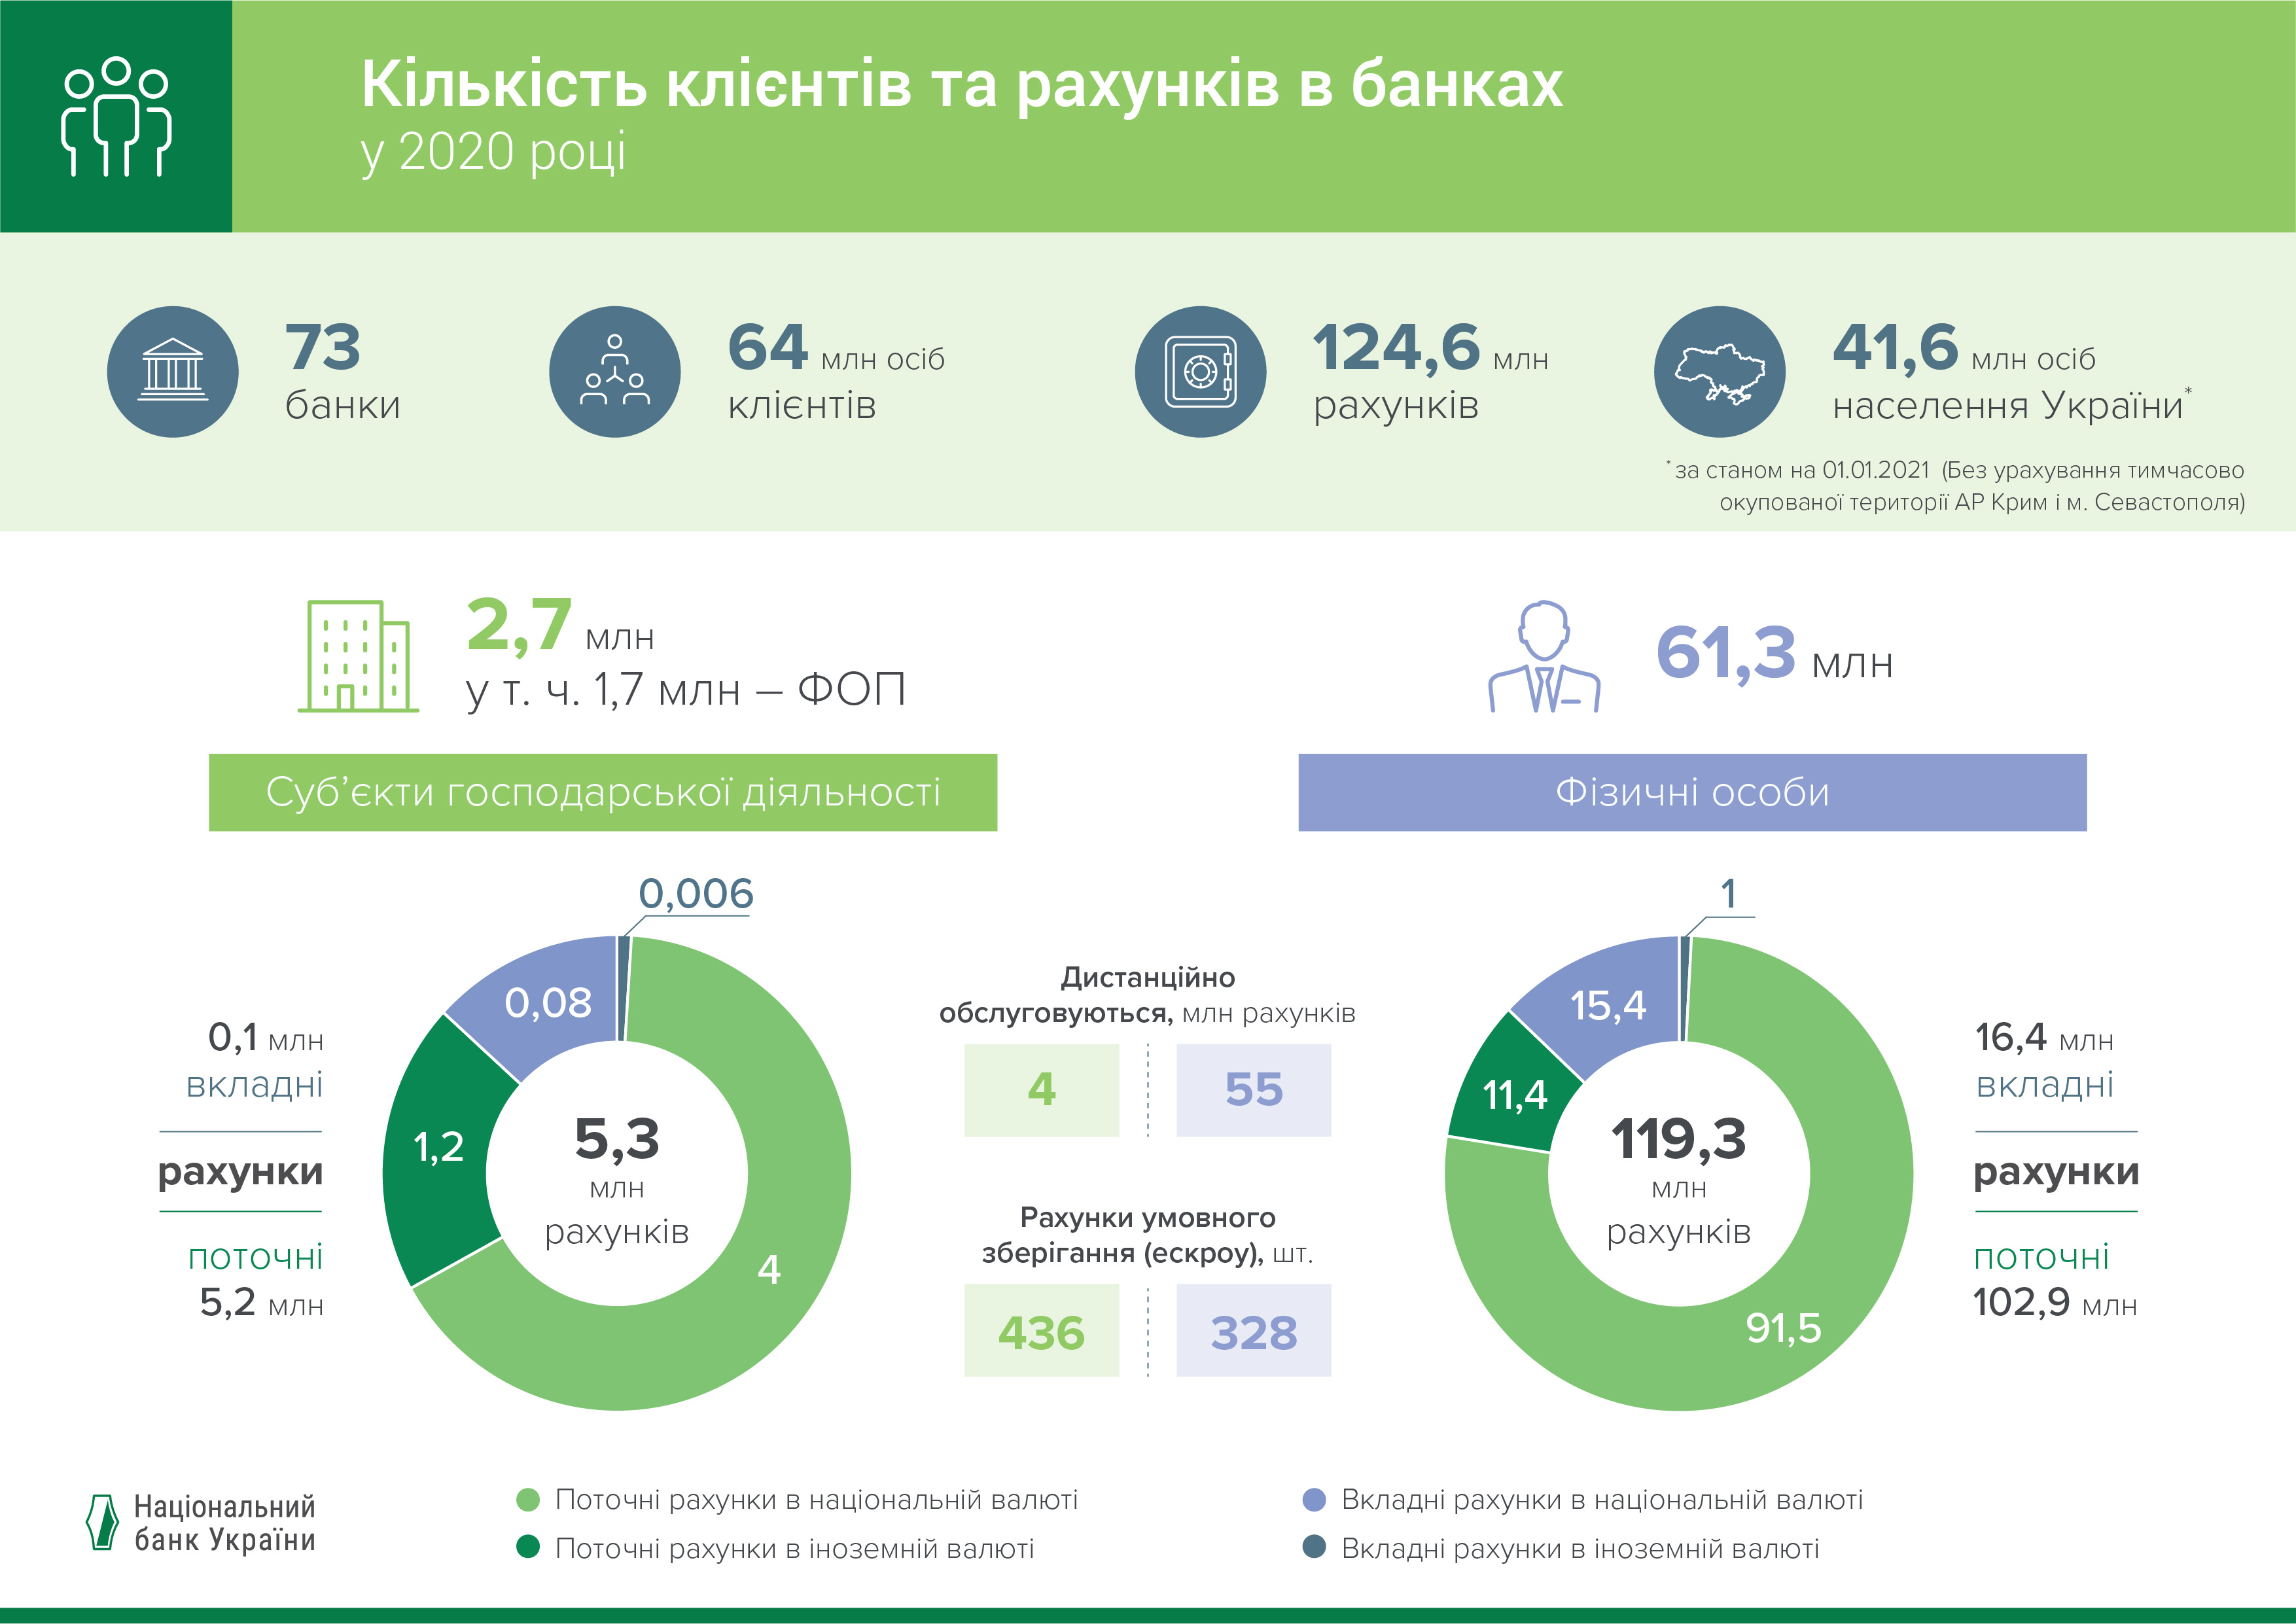 Number of customers and bank accounts, 2020 (UKR)